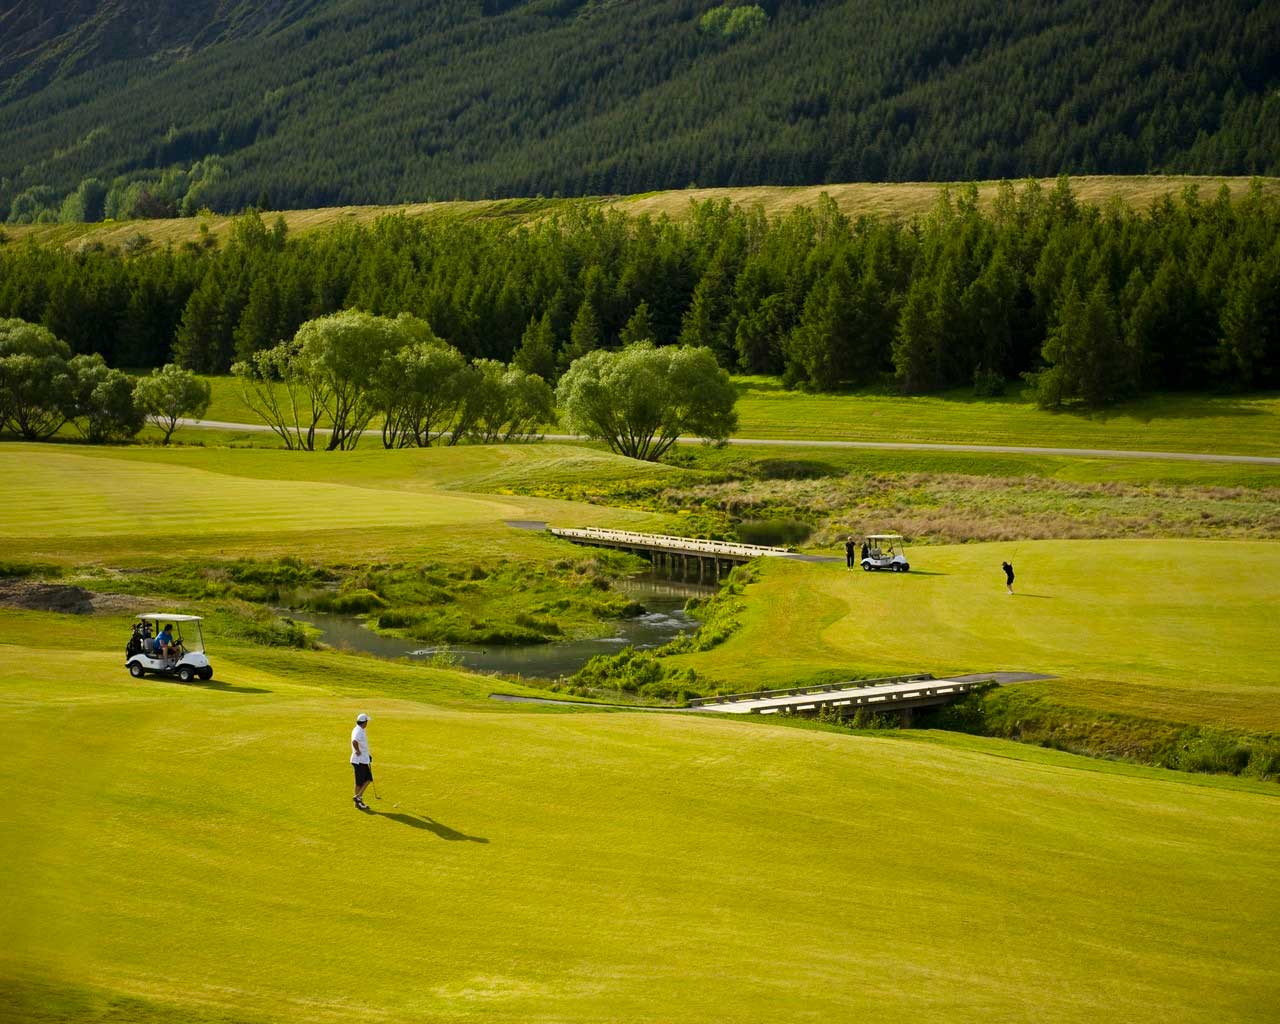 golf-and-wine-tasting-tour-millbrook-golf-course-queenstown-fairway-appellation-wine-tours